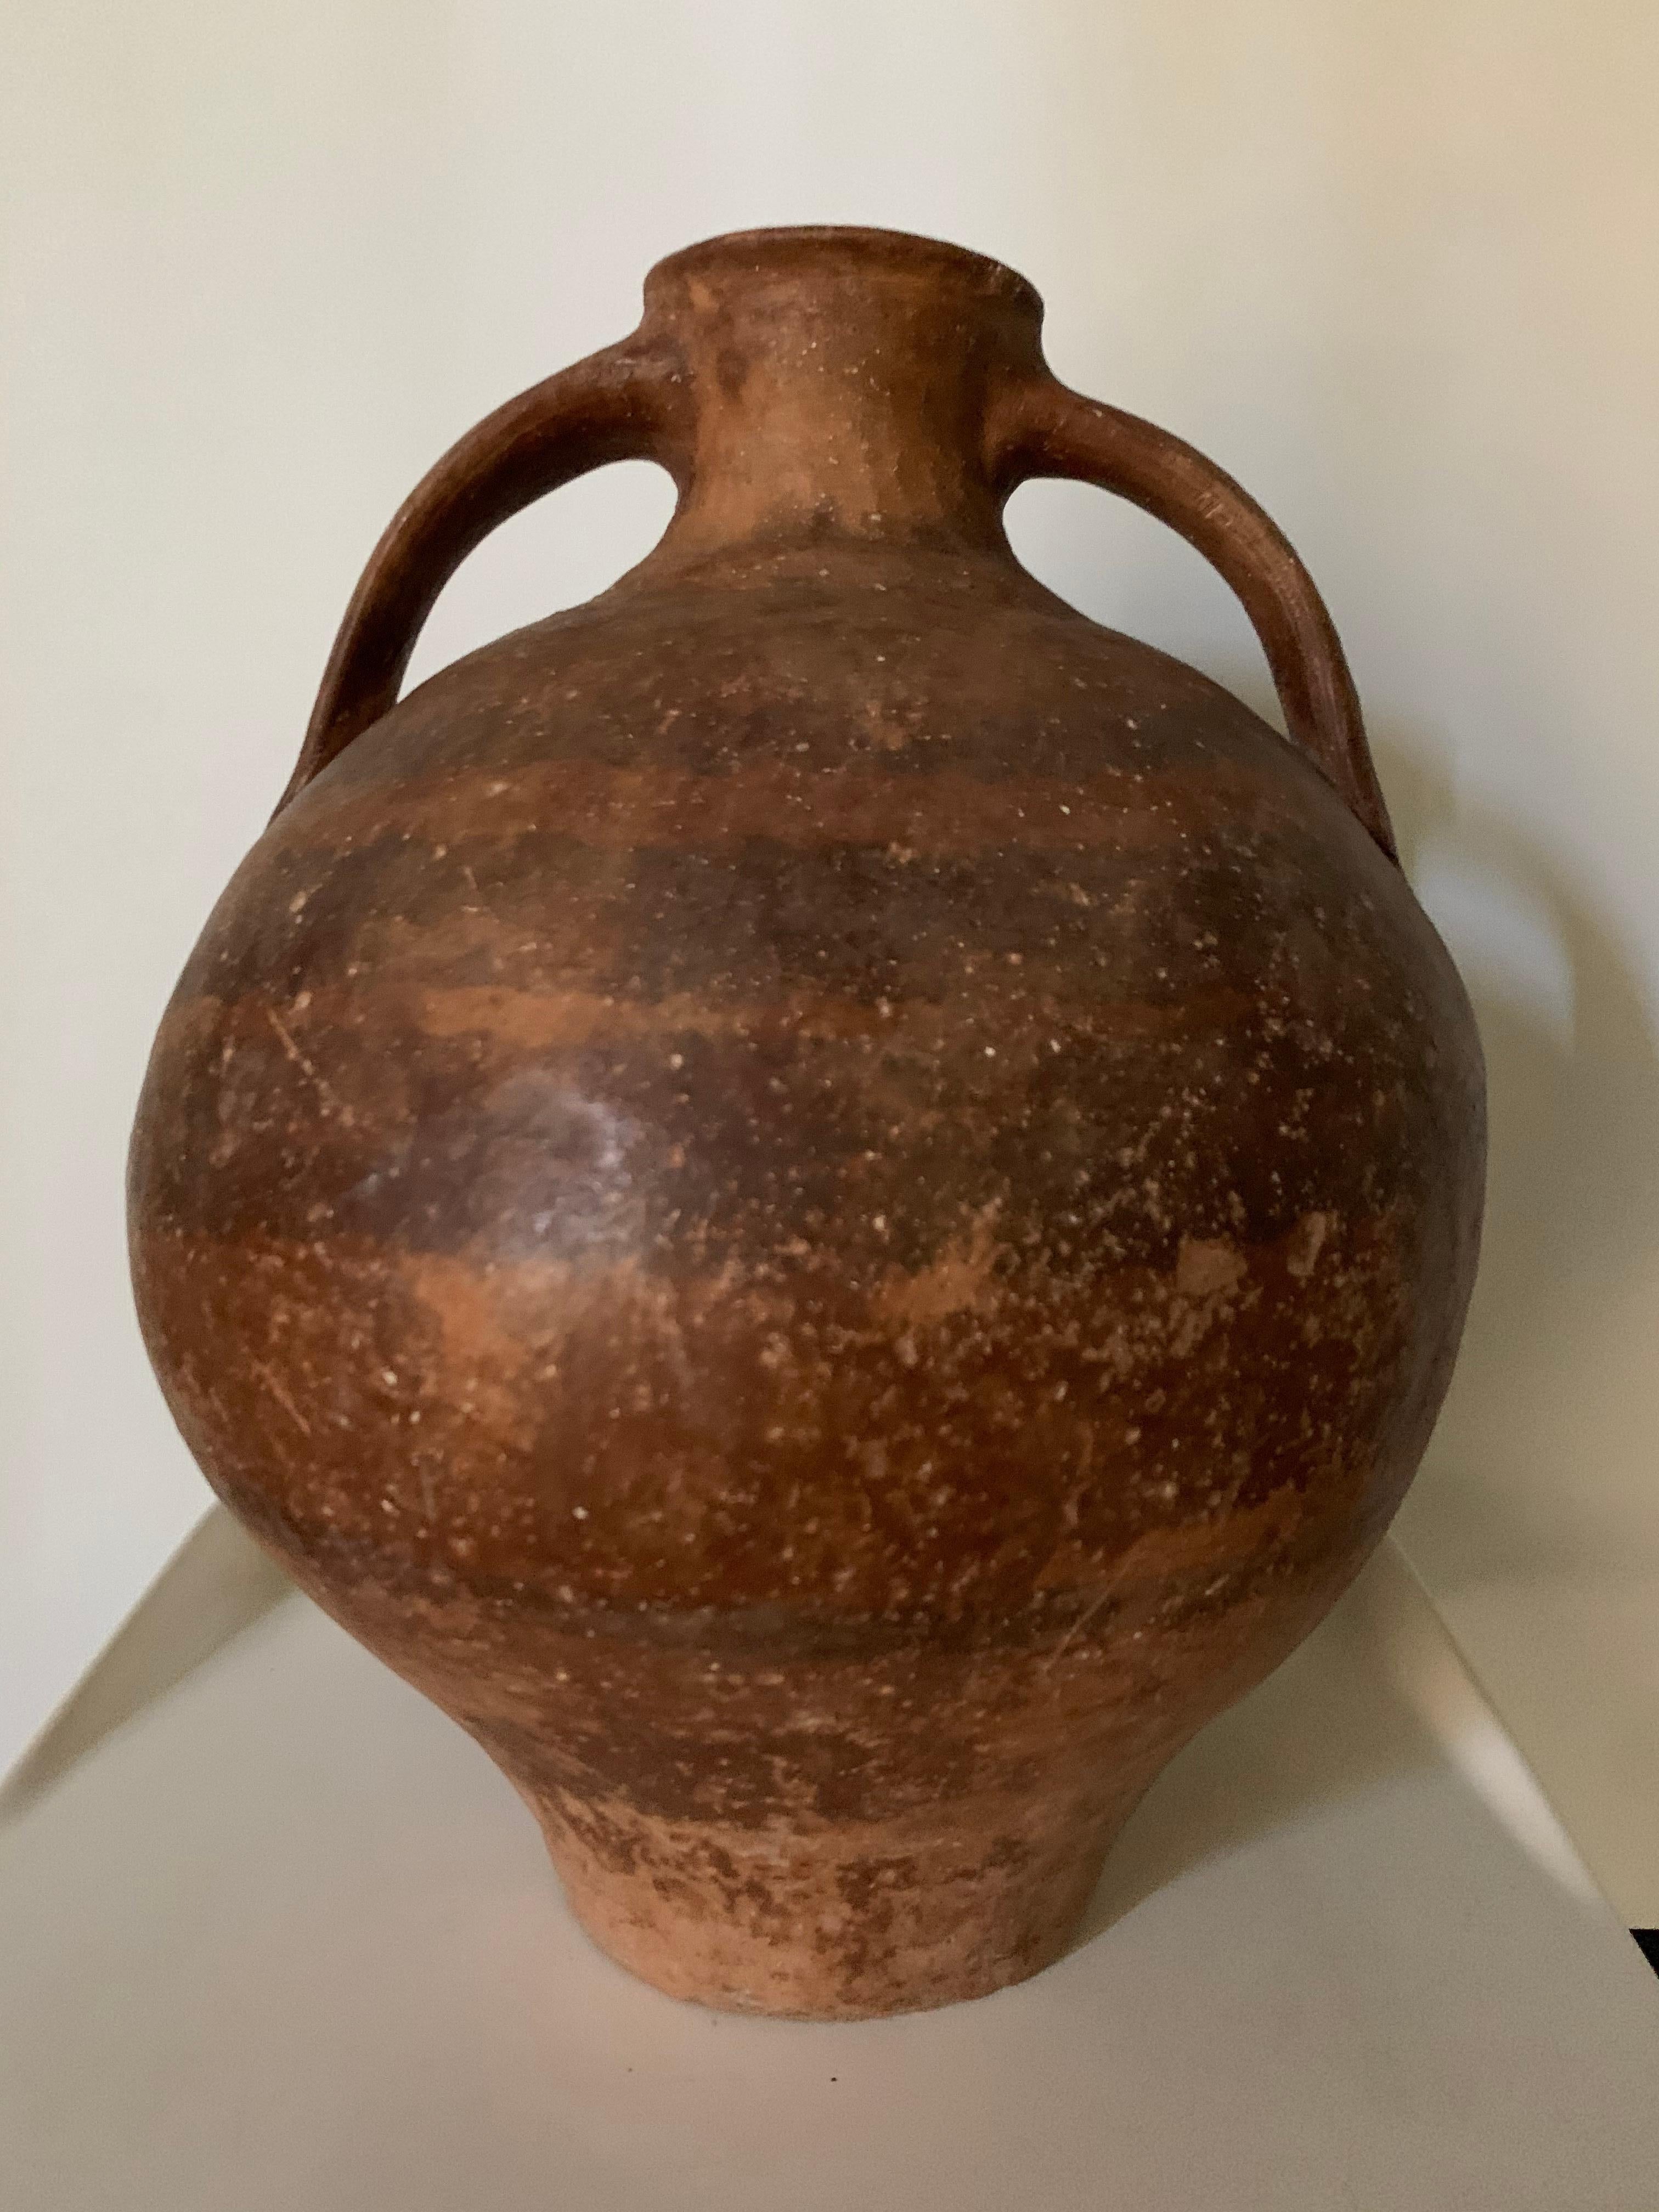 Pitcher ‘cantaros’ from Calanda, Aragon-Zaragoza area of Spain. A rare piece from a Private collection, circa 1750. Other examples can be seen in the Museo de Zaragoza.
With gorgeous original patina, this jar features the characteristic